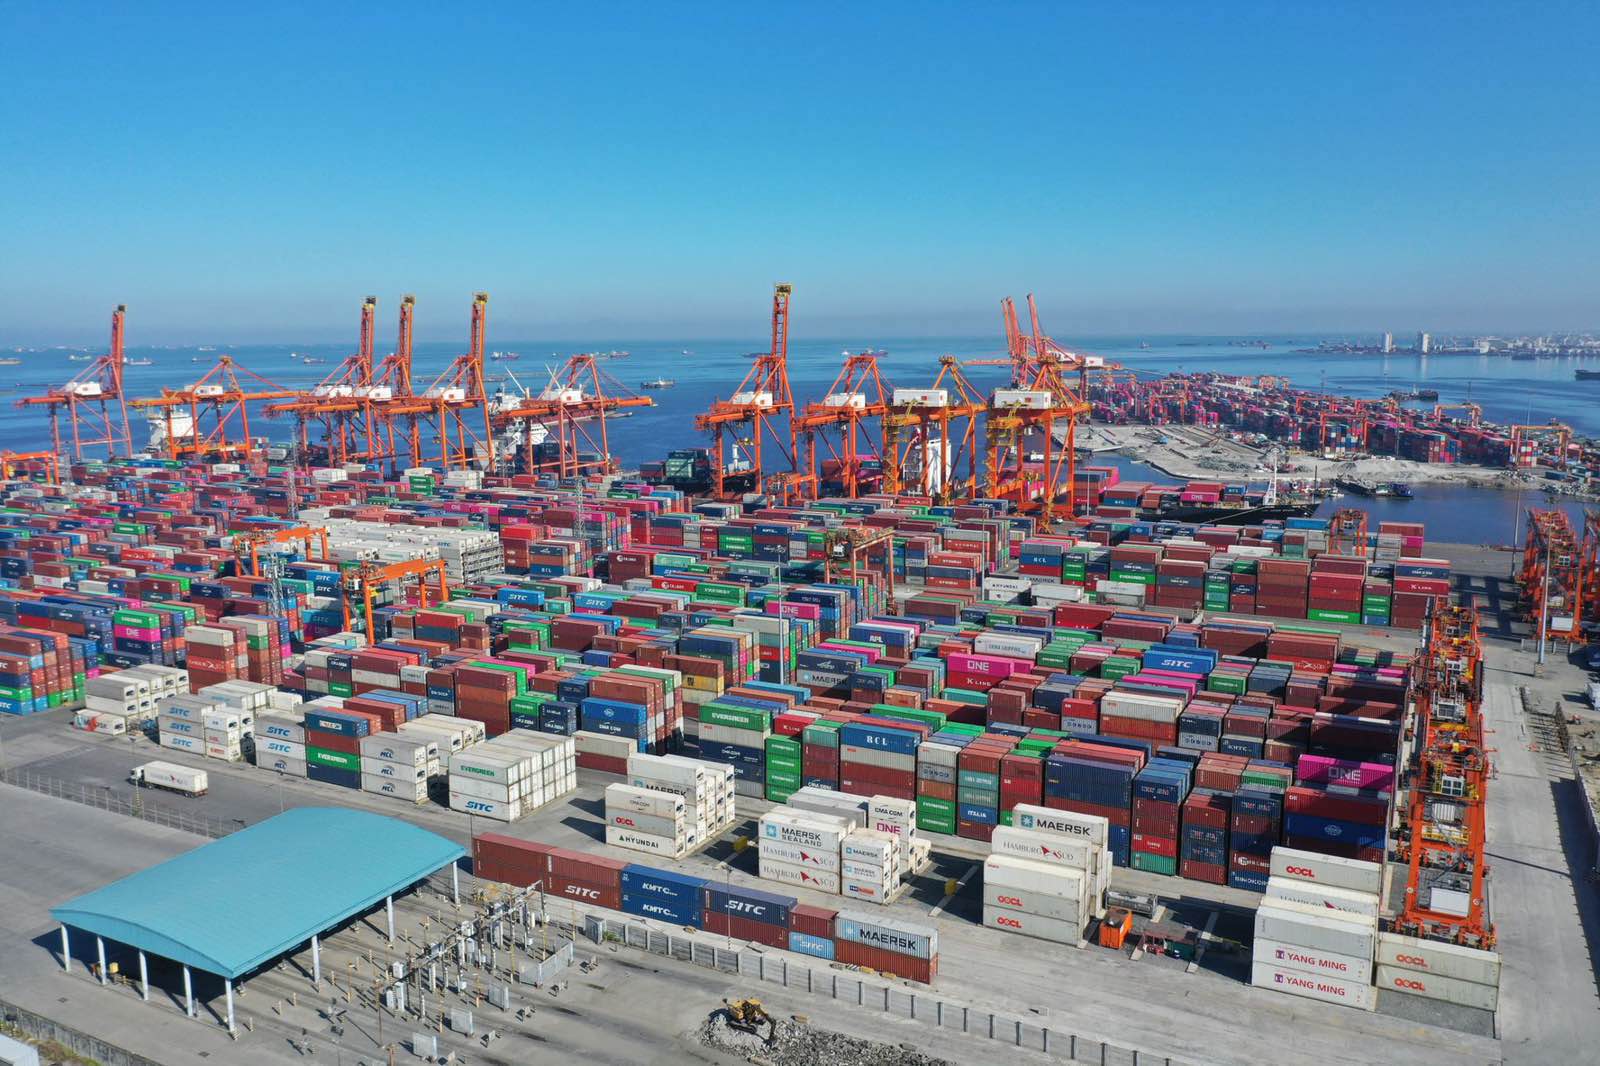 Manila port bursting at the seams with cargo in the Philippines on Tuesday, March 31, 2020.